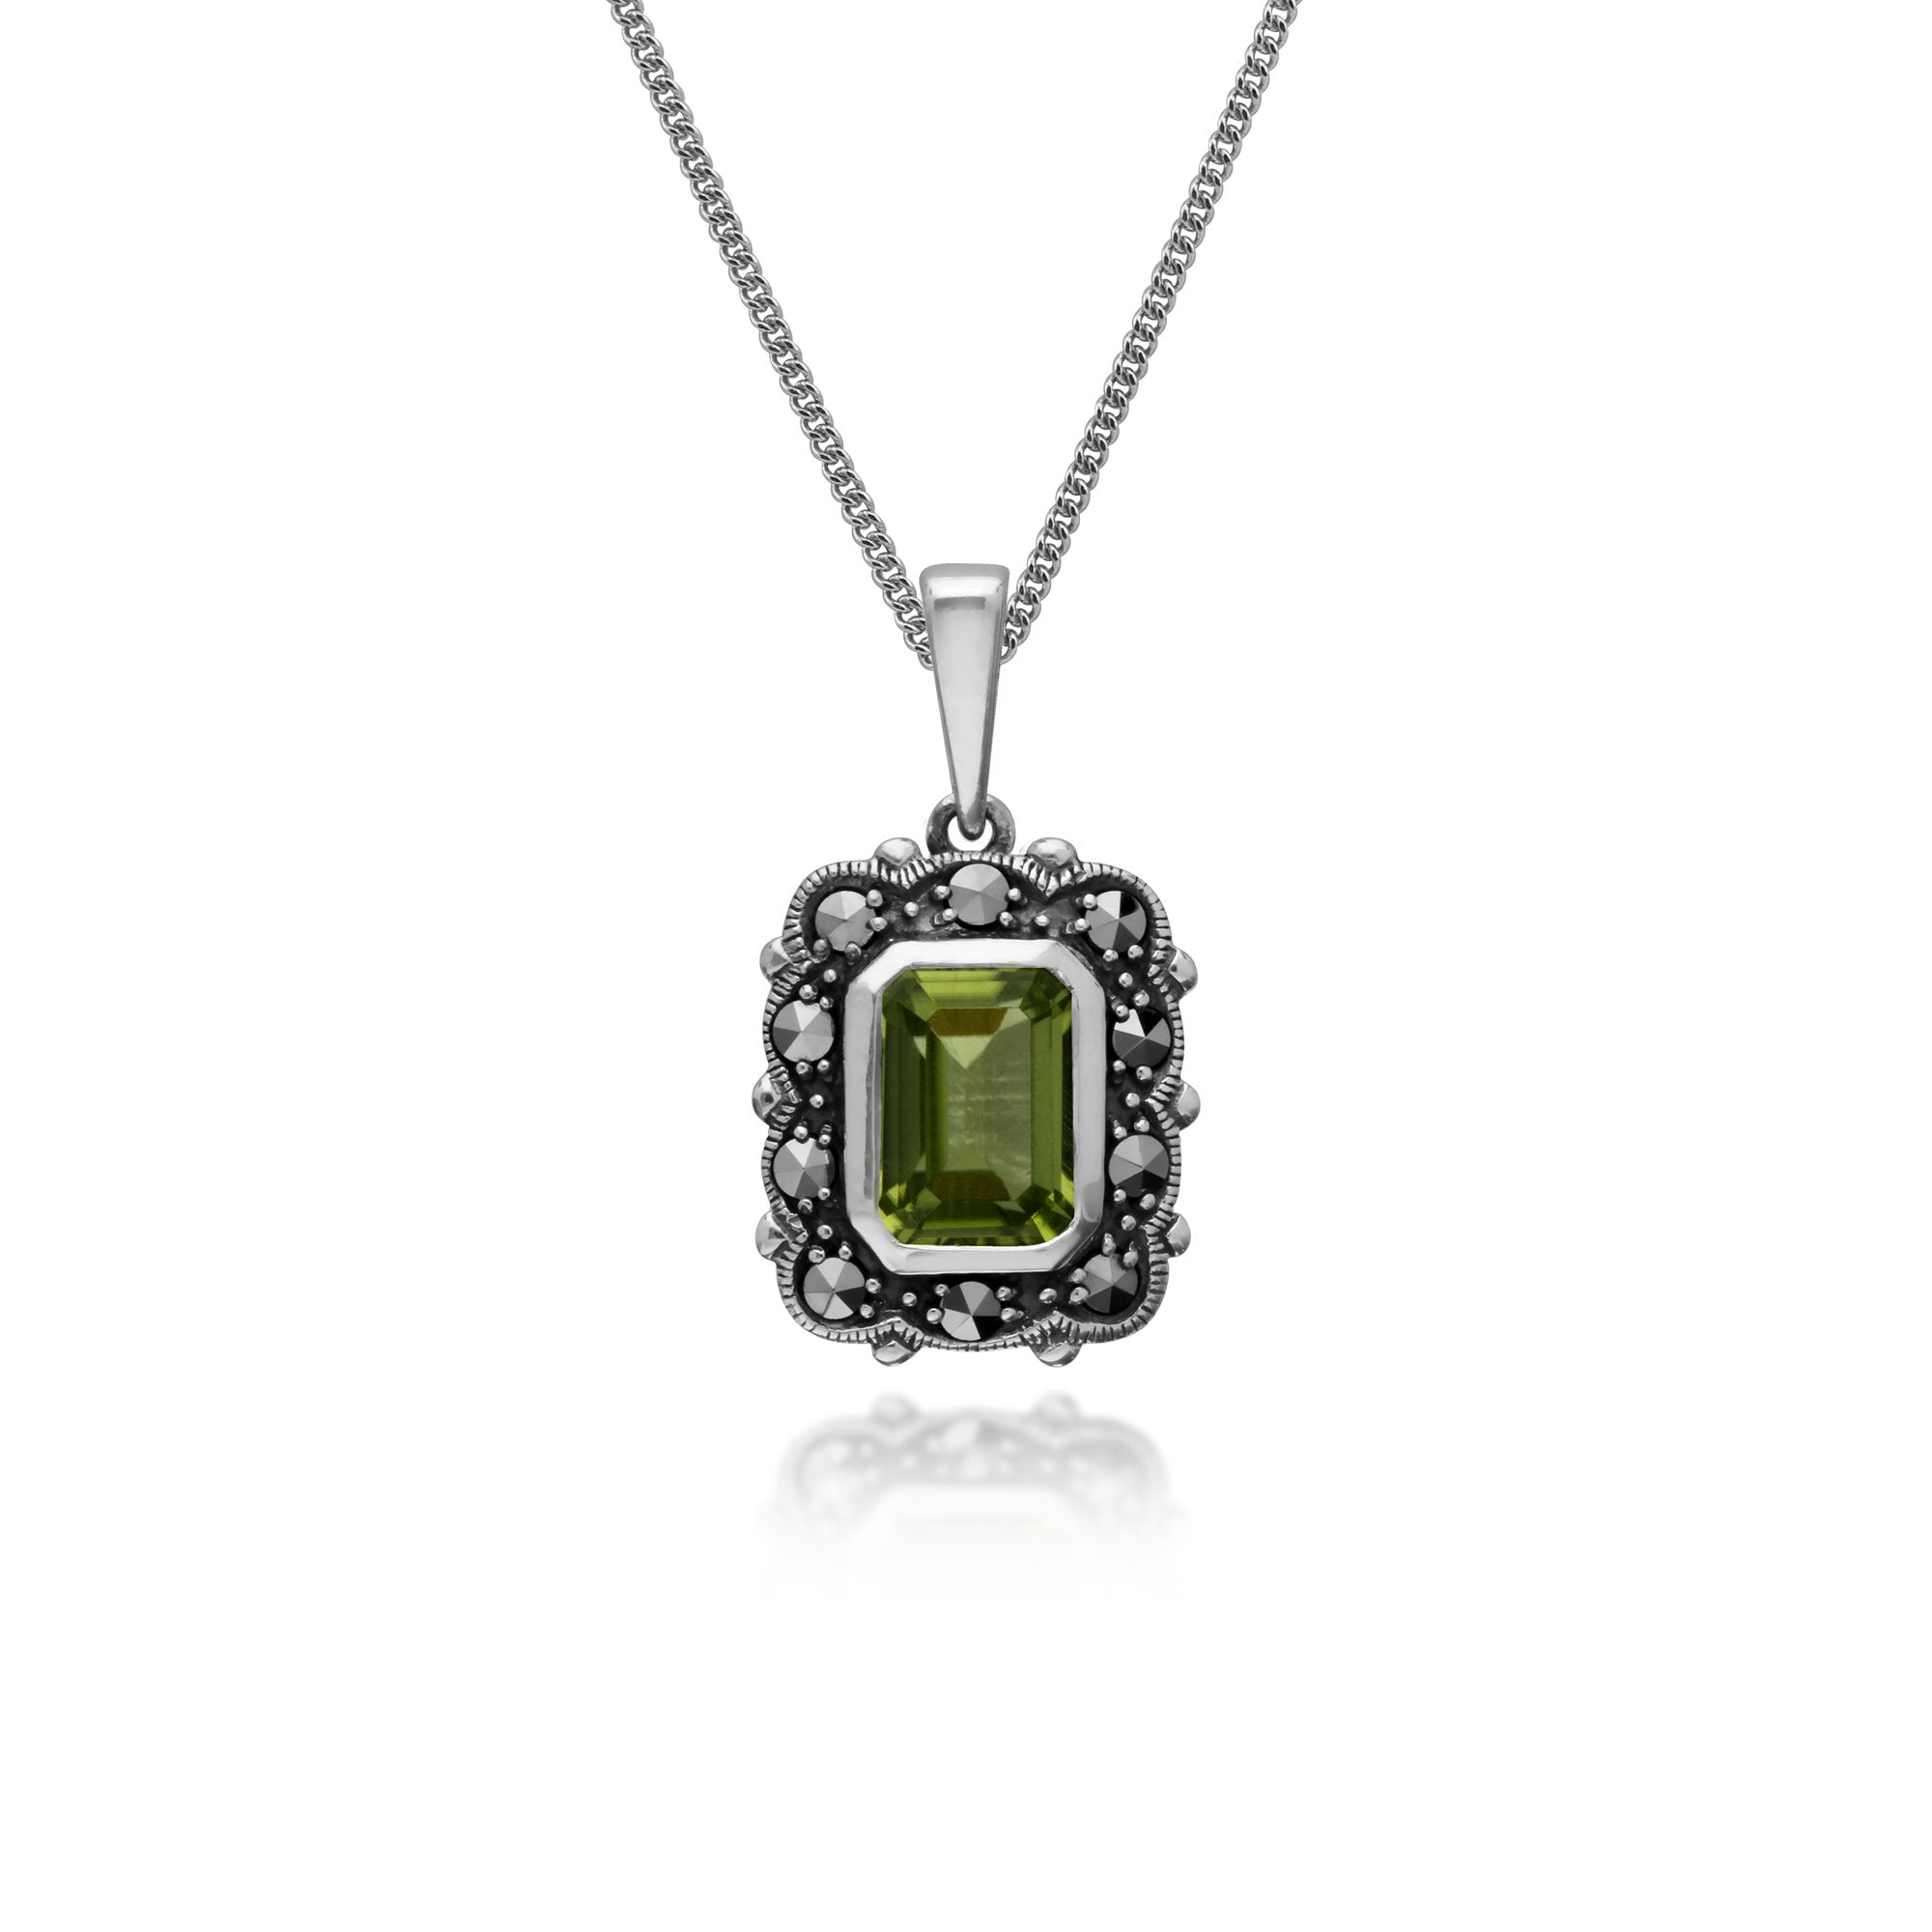 Art Deco Style Octagon Peridot & Marcasite Pendant in 925 Sterling Silver